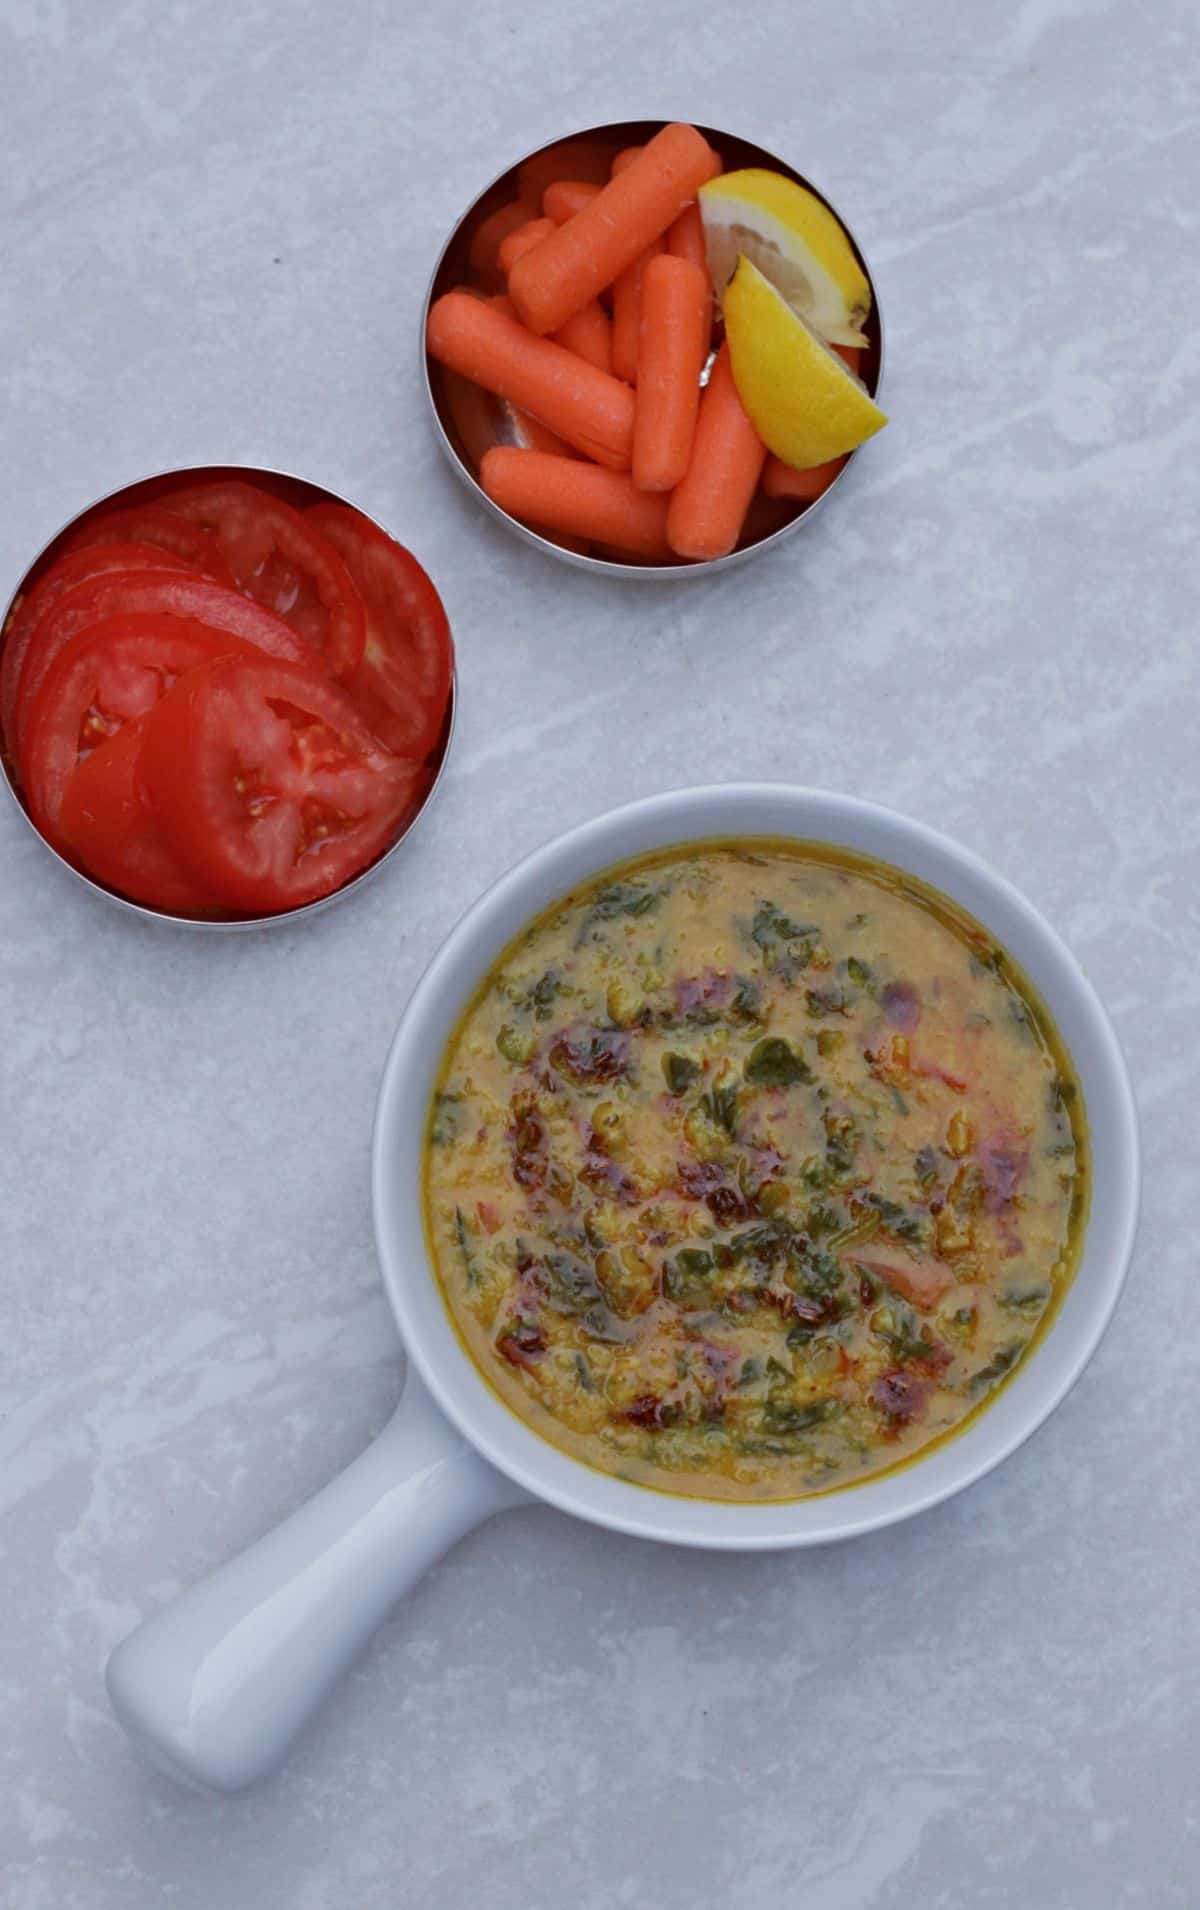 dal palak curry in a white bowl with carrot and tomatoes on the side